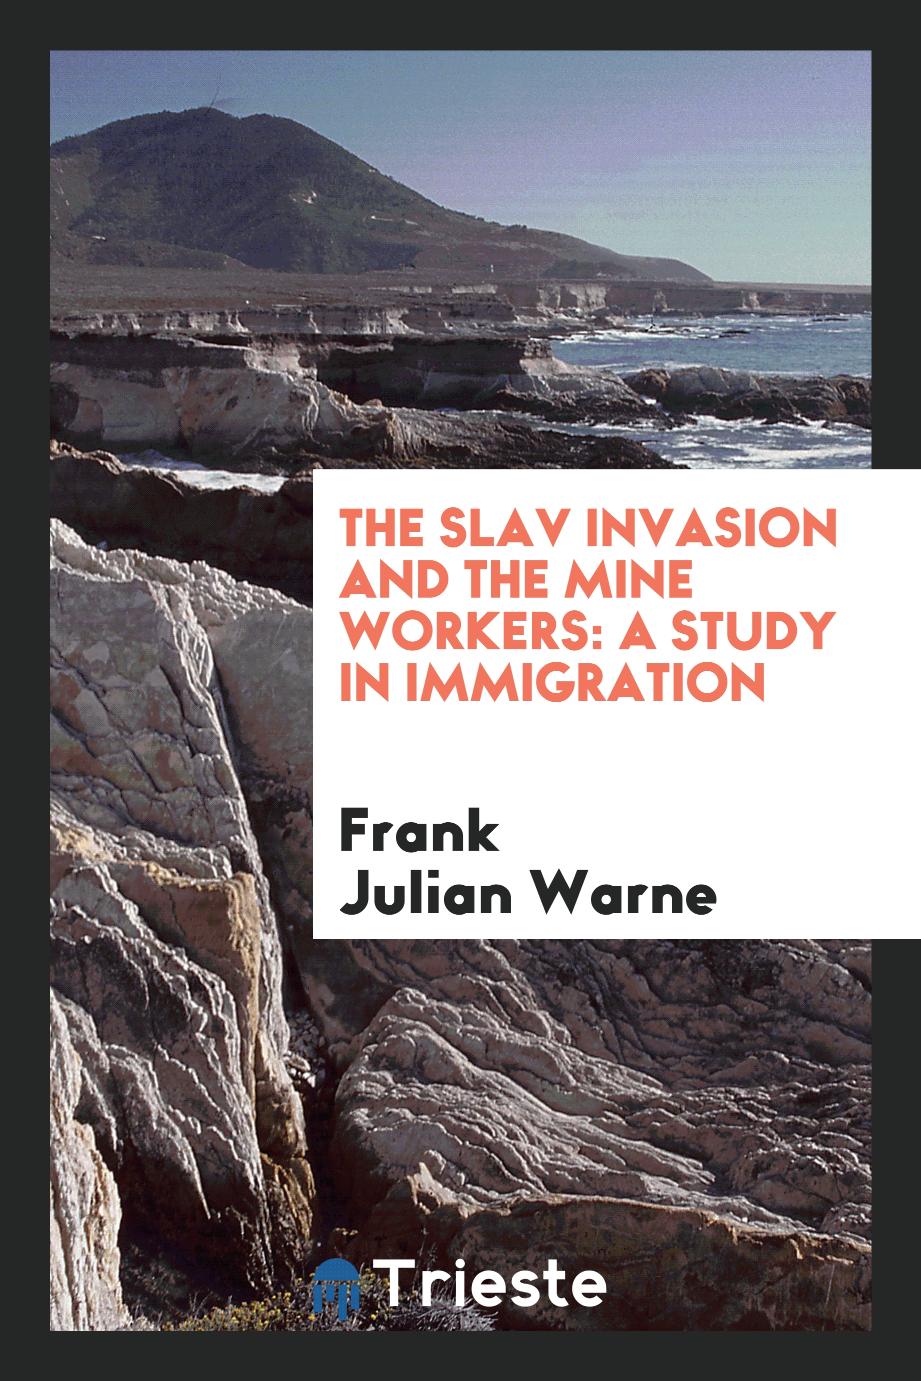 The Slav invasion and the mine workers: a study in immigration